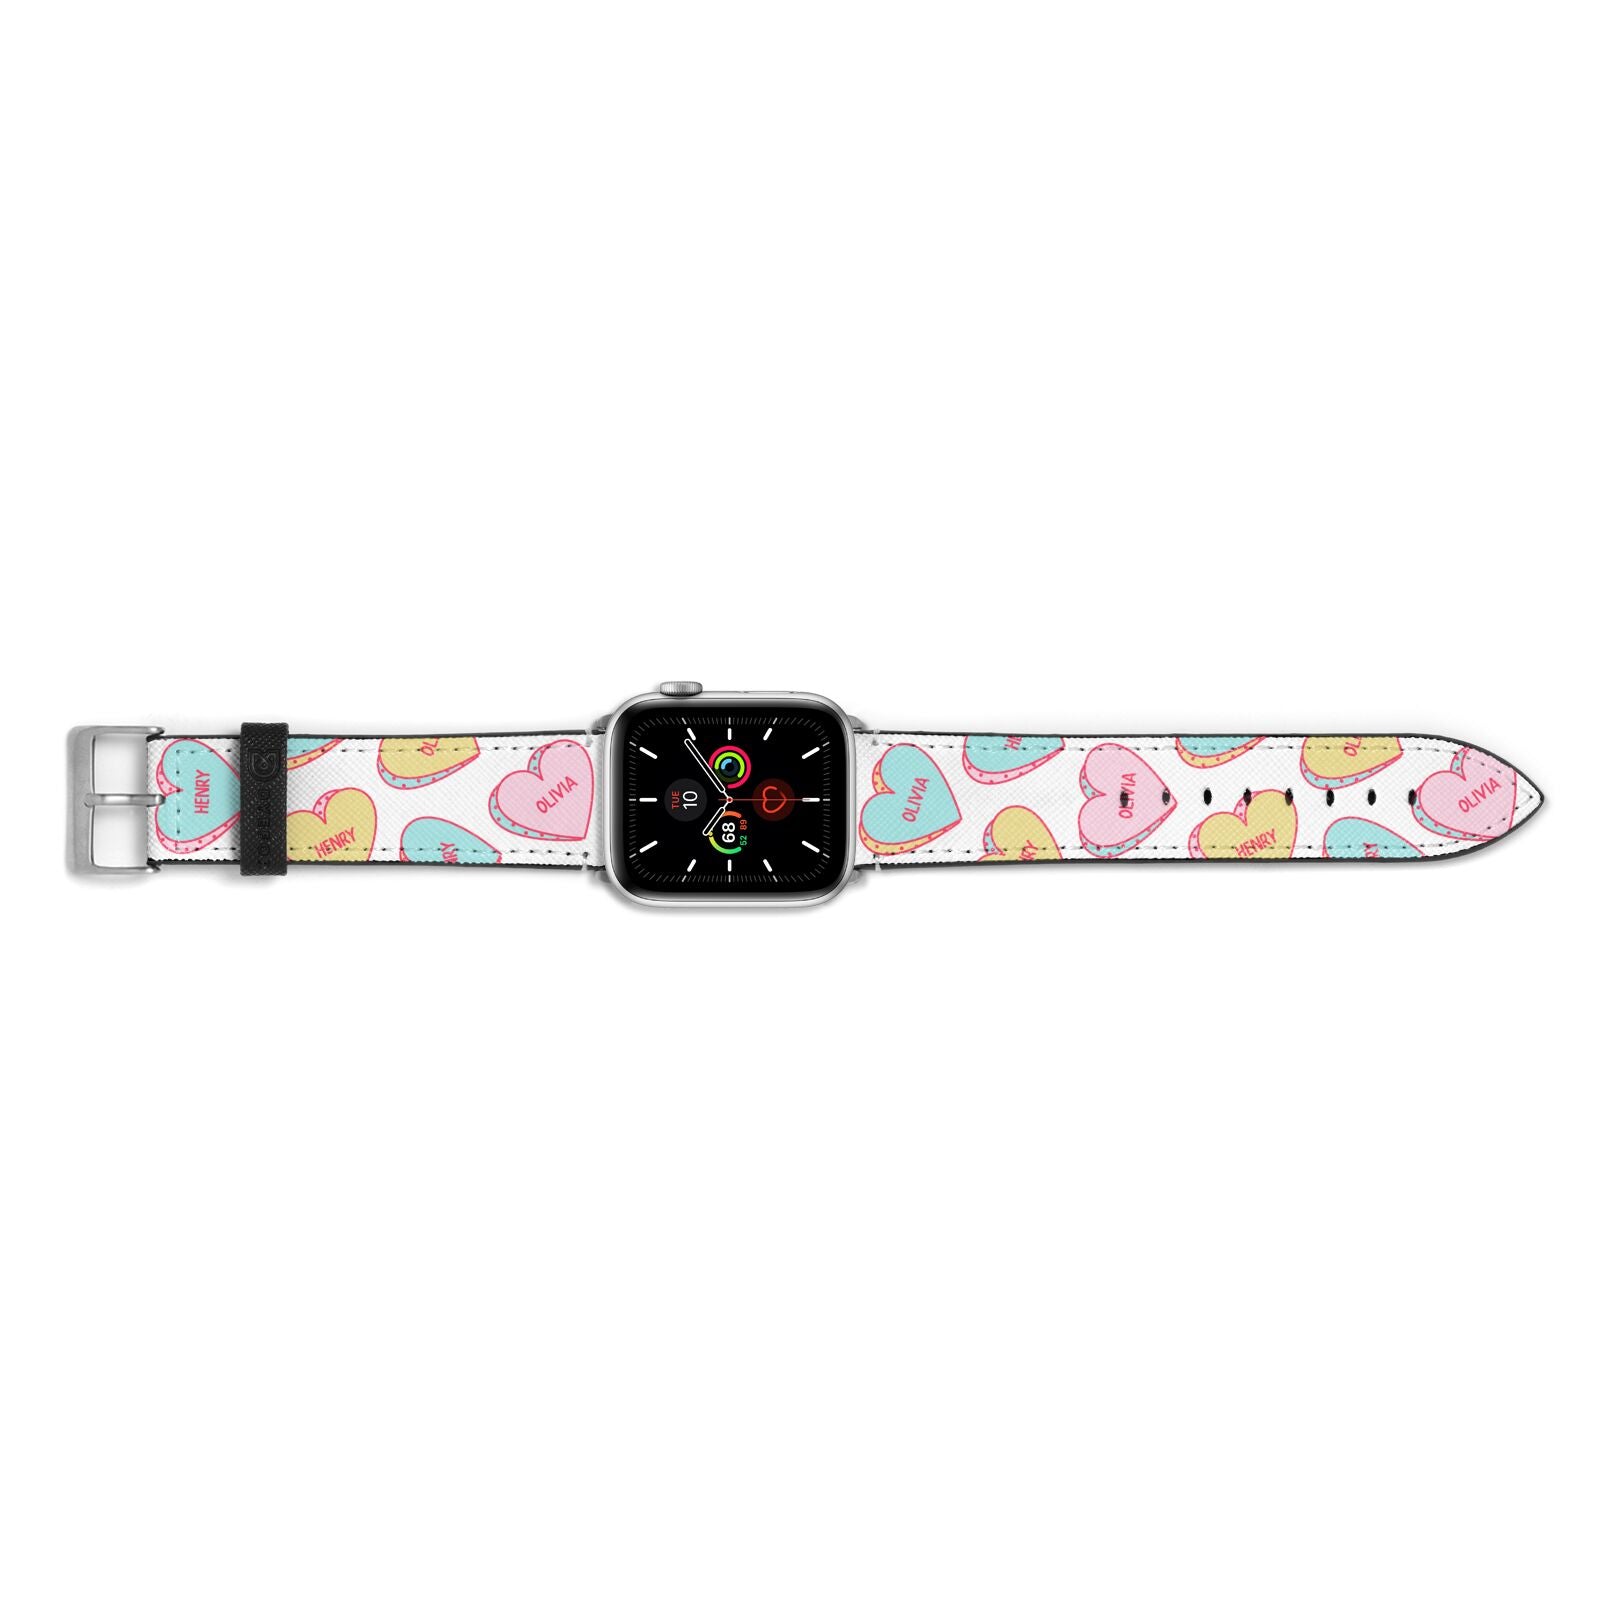 Personalised Heart Sweets Apple Watch Strap Landscape Image Silver Hardware